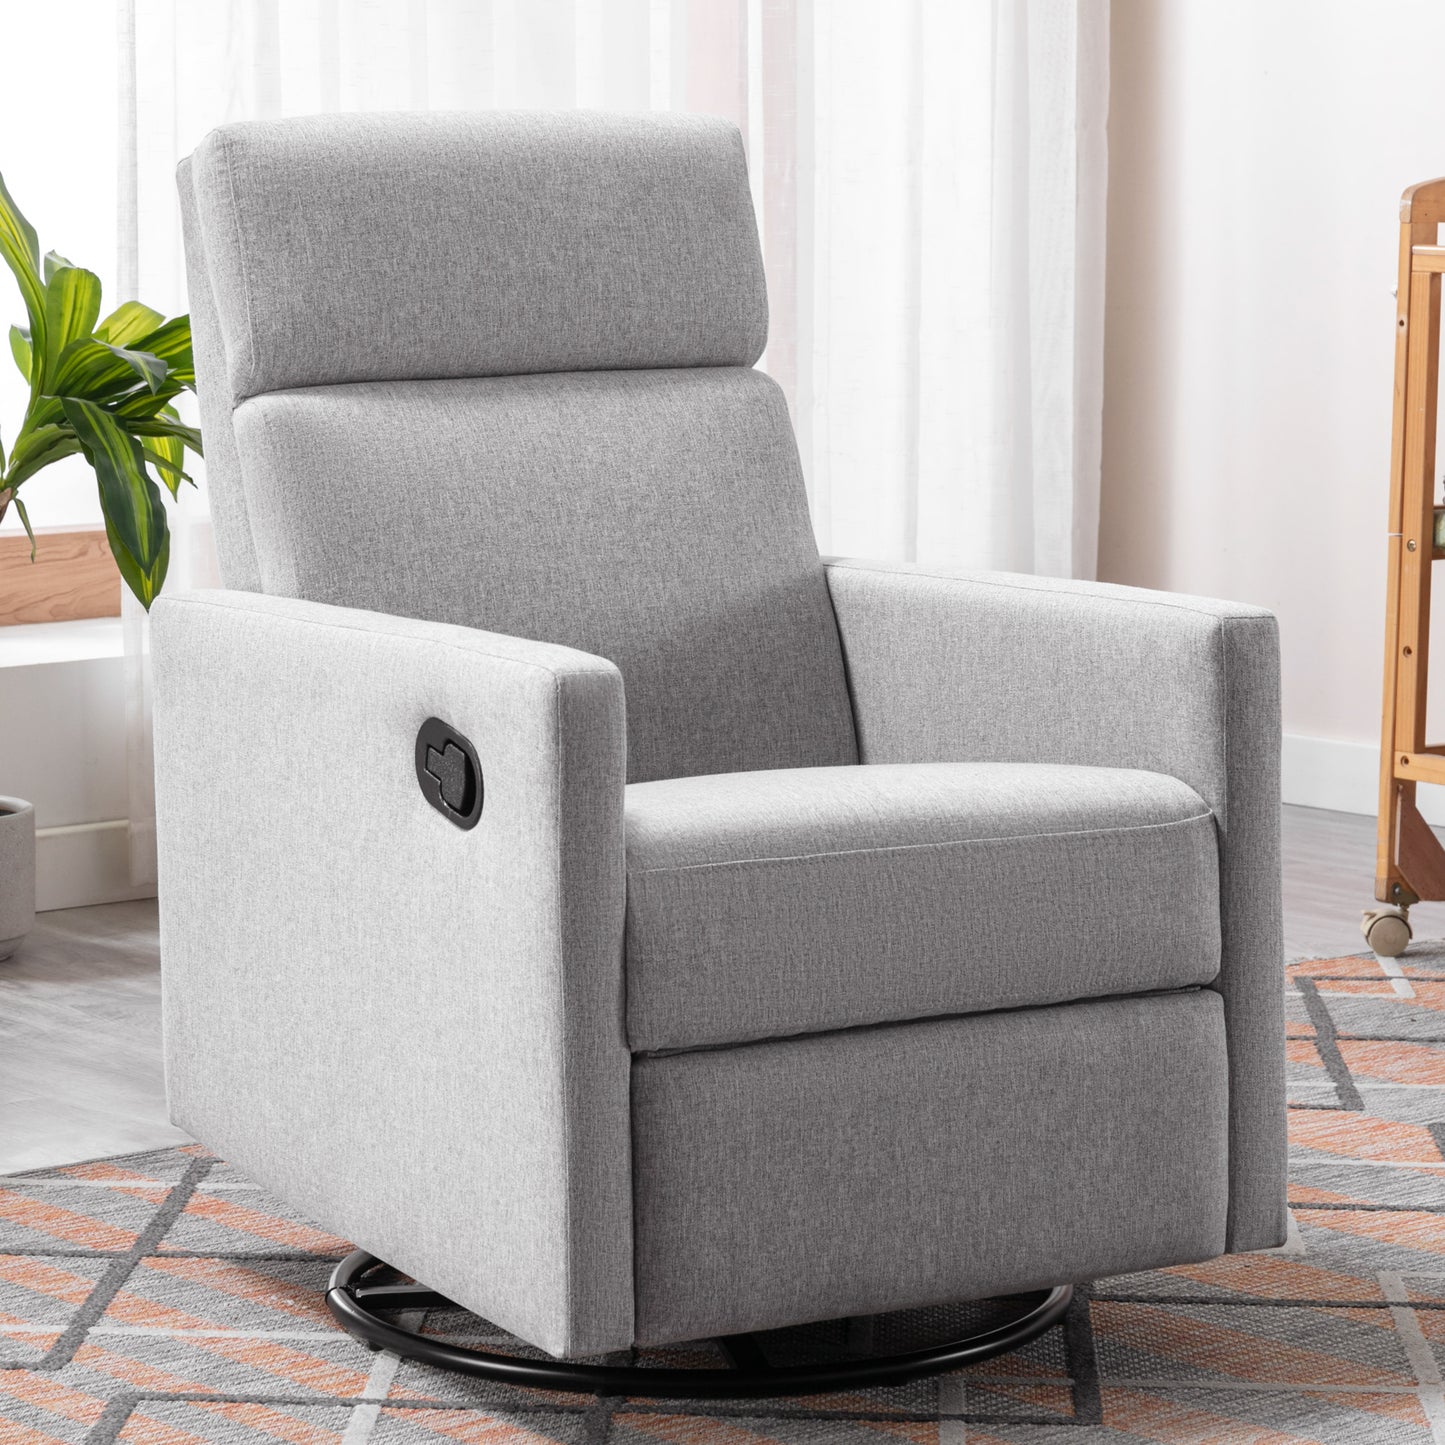 Manual Recliner Chair, Heavy Duty Reclining Mechanism with Thick Seat and Backrest, Elderly Single Recliner Rocker Sofa Swivel Glider Chair for Nursery Bedroom Home Theater Office, Gray